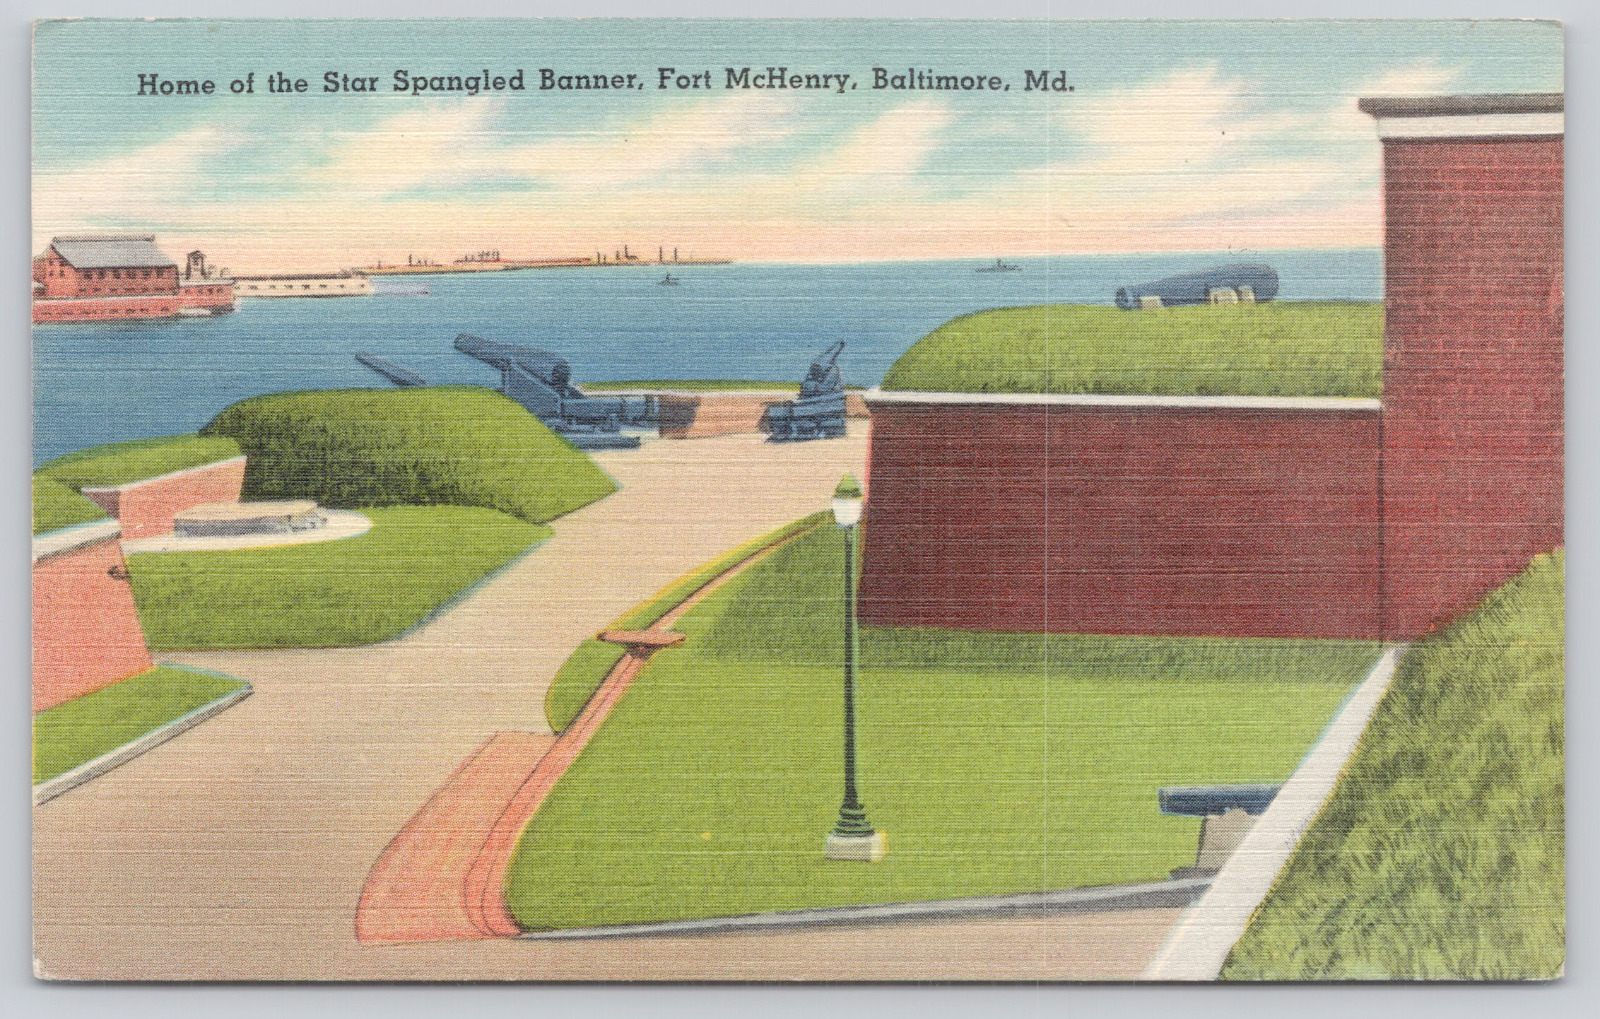 Fort McHenry, Baltimore MD c1930 Postcard, Home of Star Spangled Banner